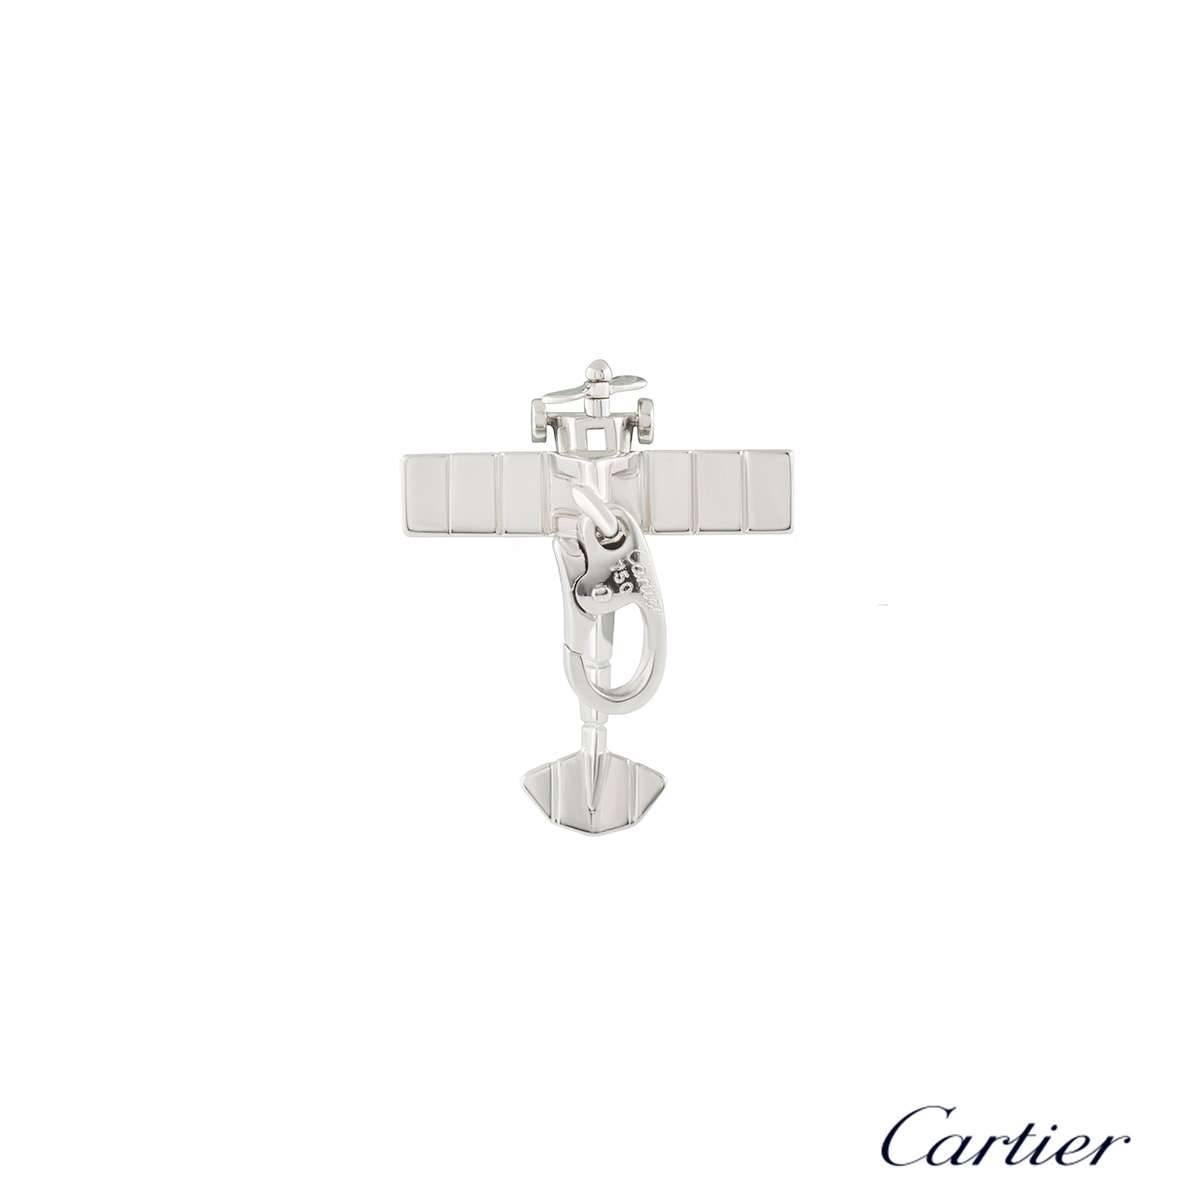 A unique 18k white gold Airplane charm by Cartier. The charm is designed as a mini Monoplane, complete with a rotational propeller to the front. The charm measures 2cm x 2.3cm and features a lobster clasp attached to the top, with a gross weight of